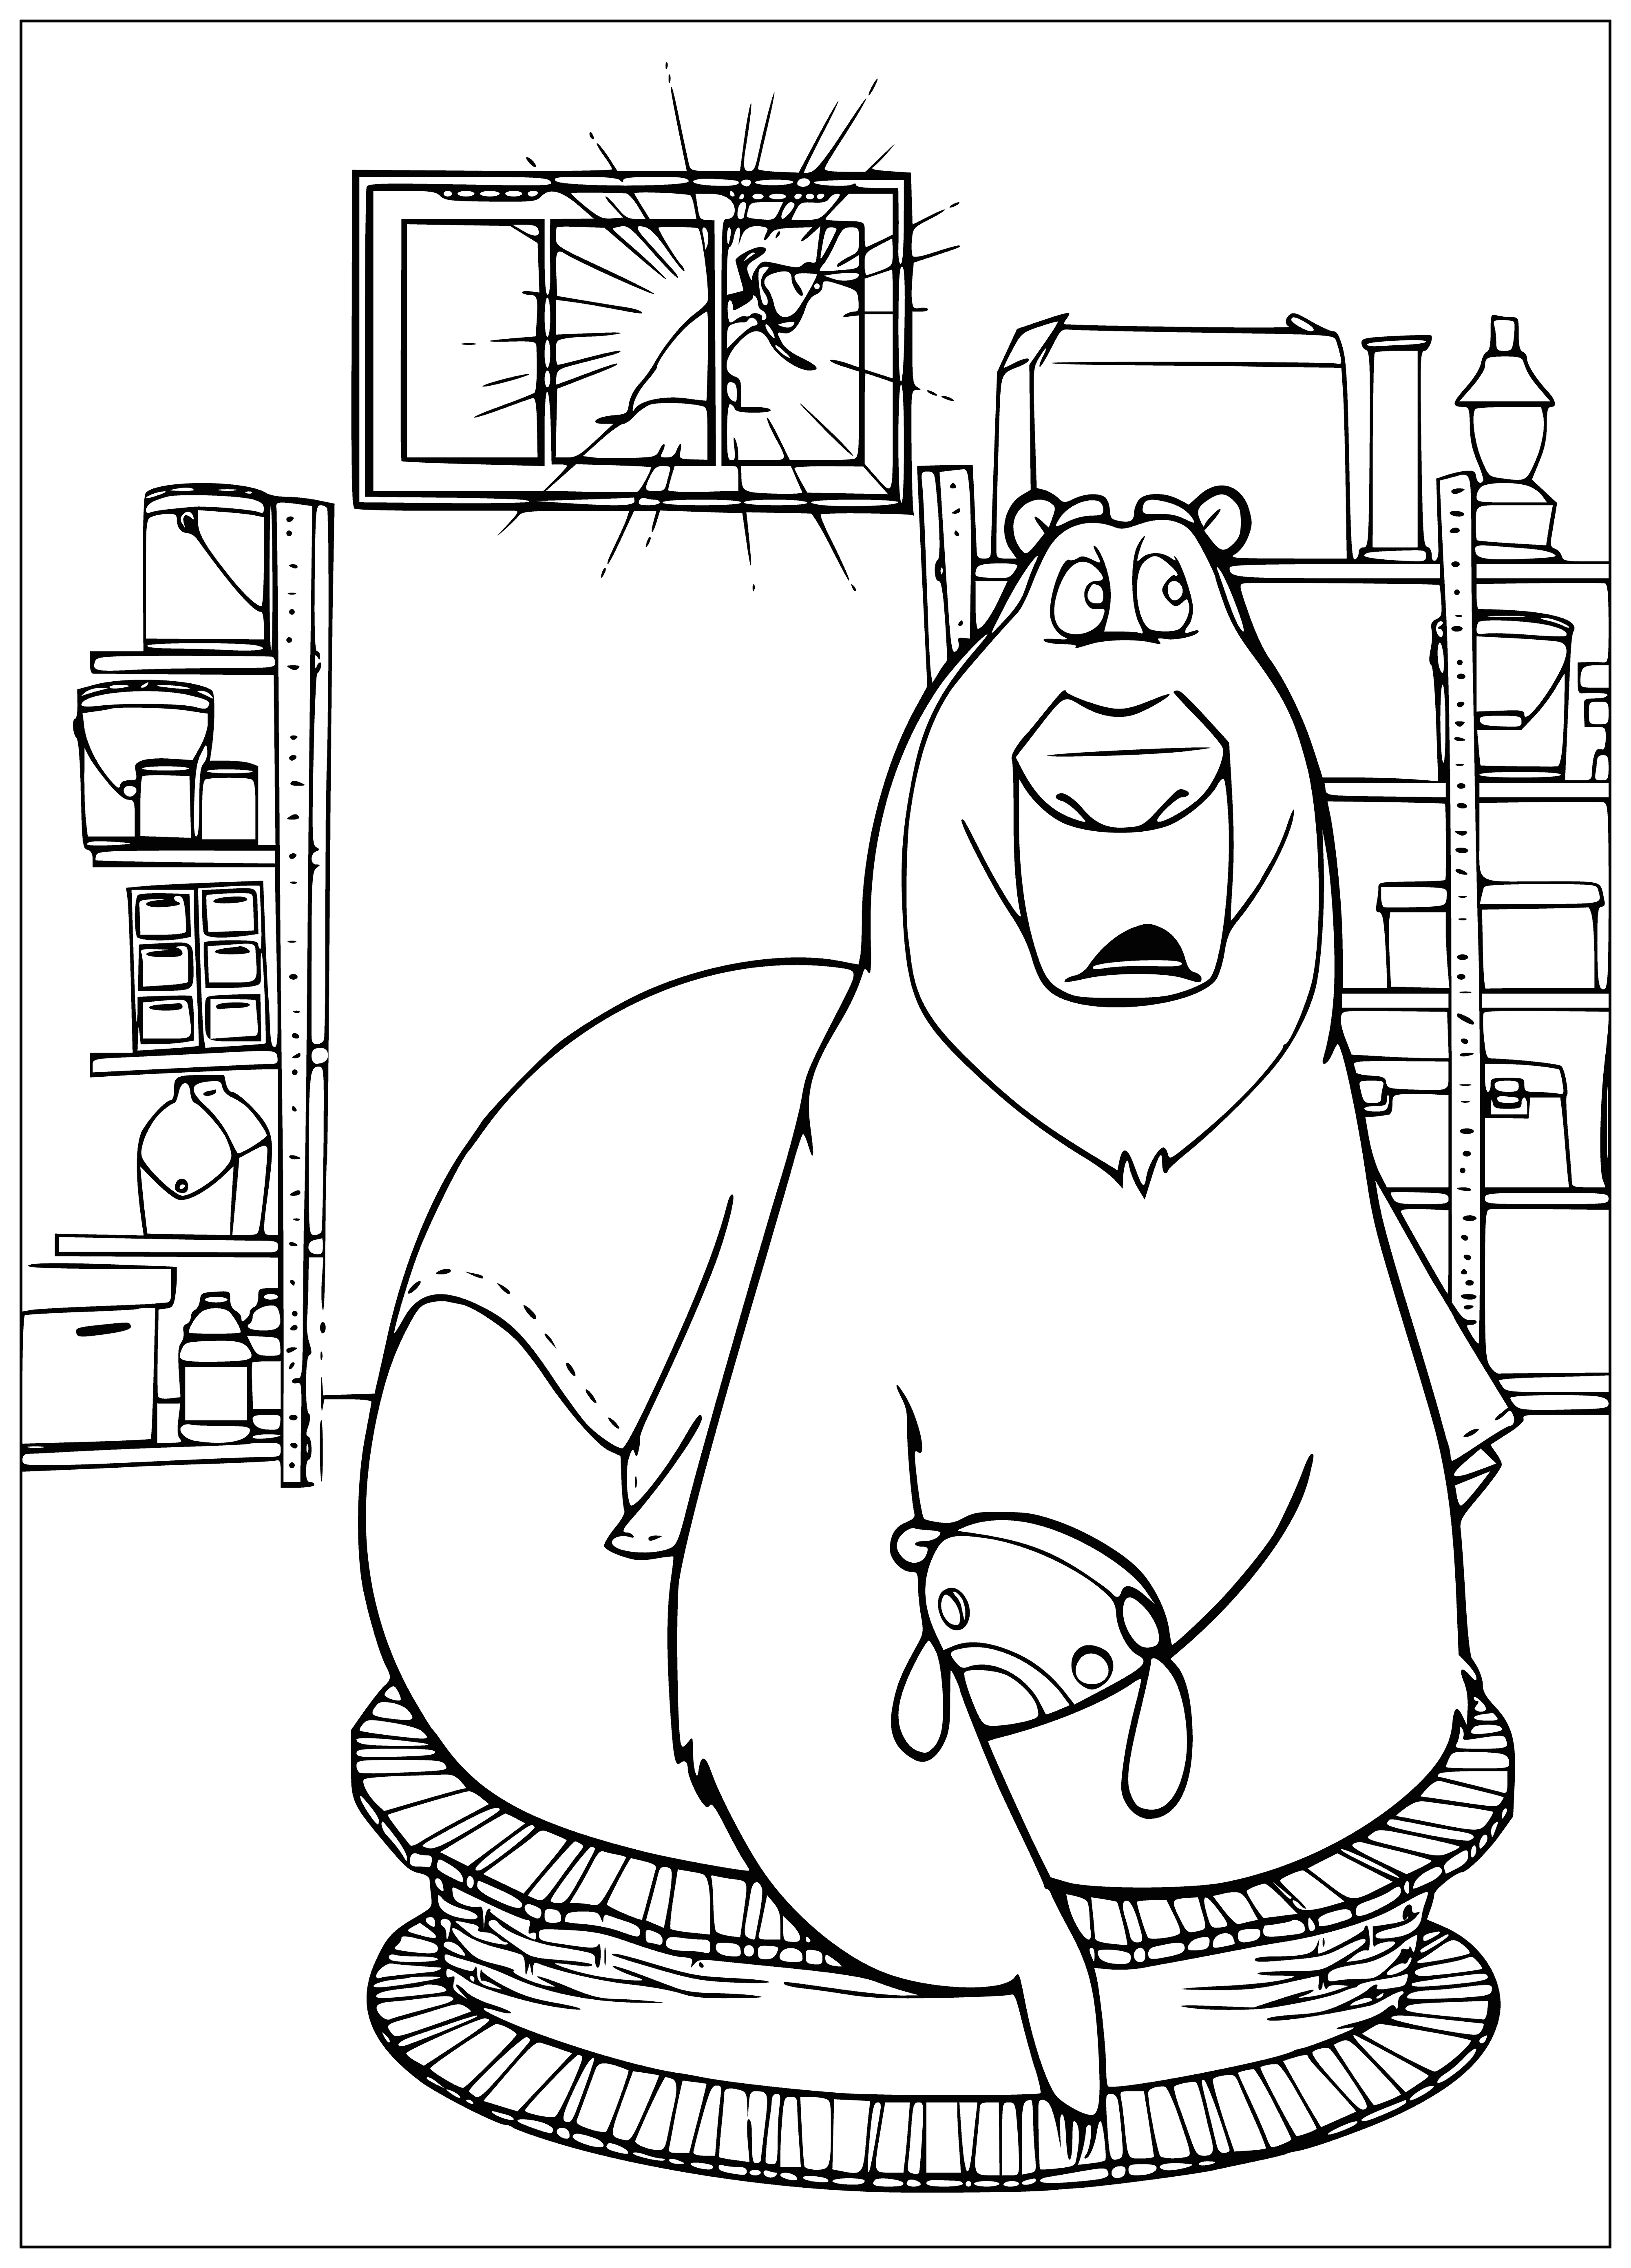 What's the sound? coloring page